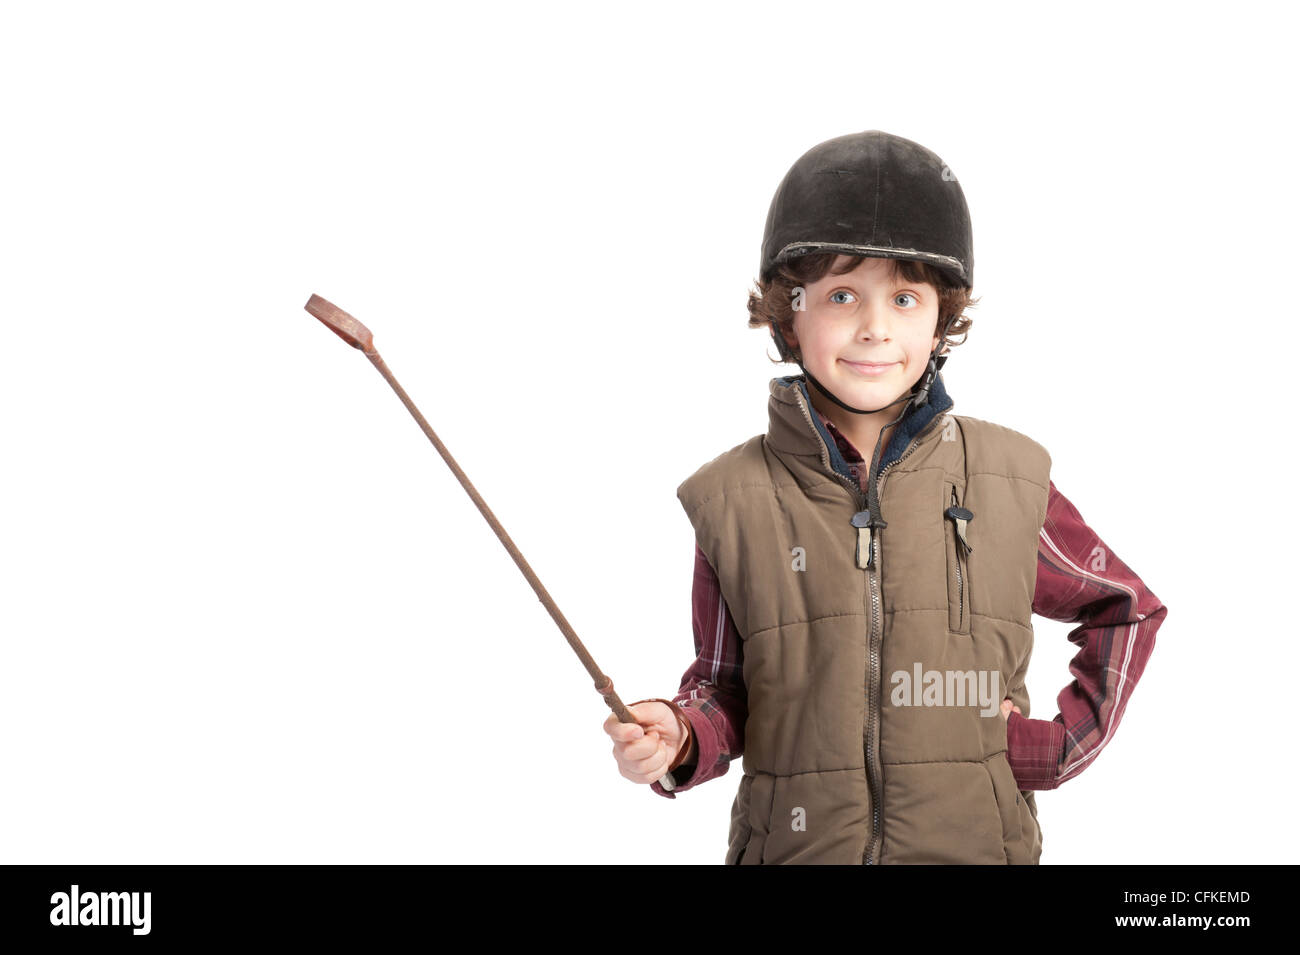 boy with horse ourfit and whip , isolated on white background Stock Photo